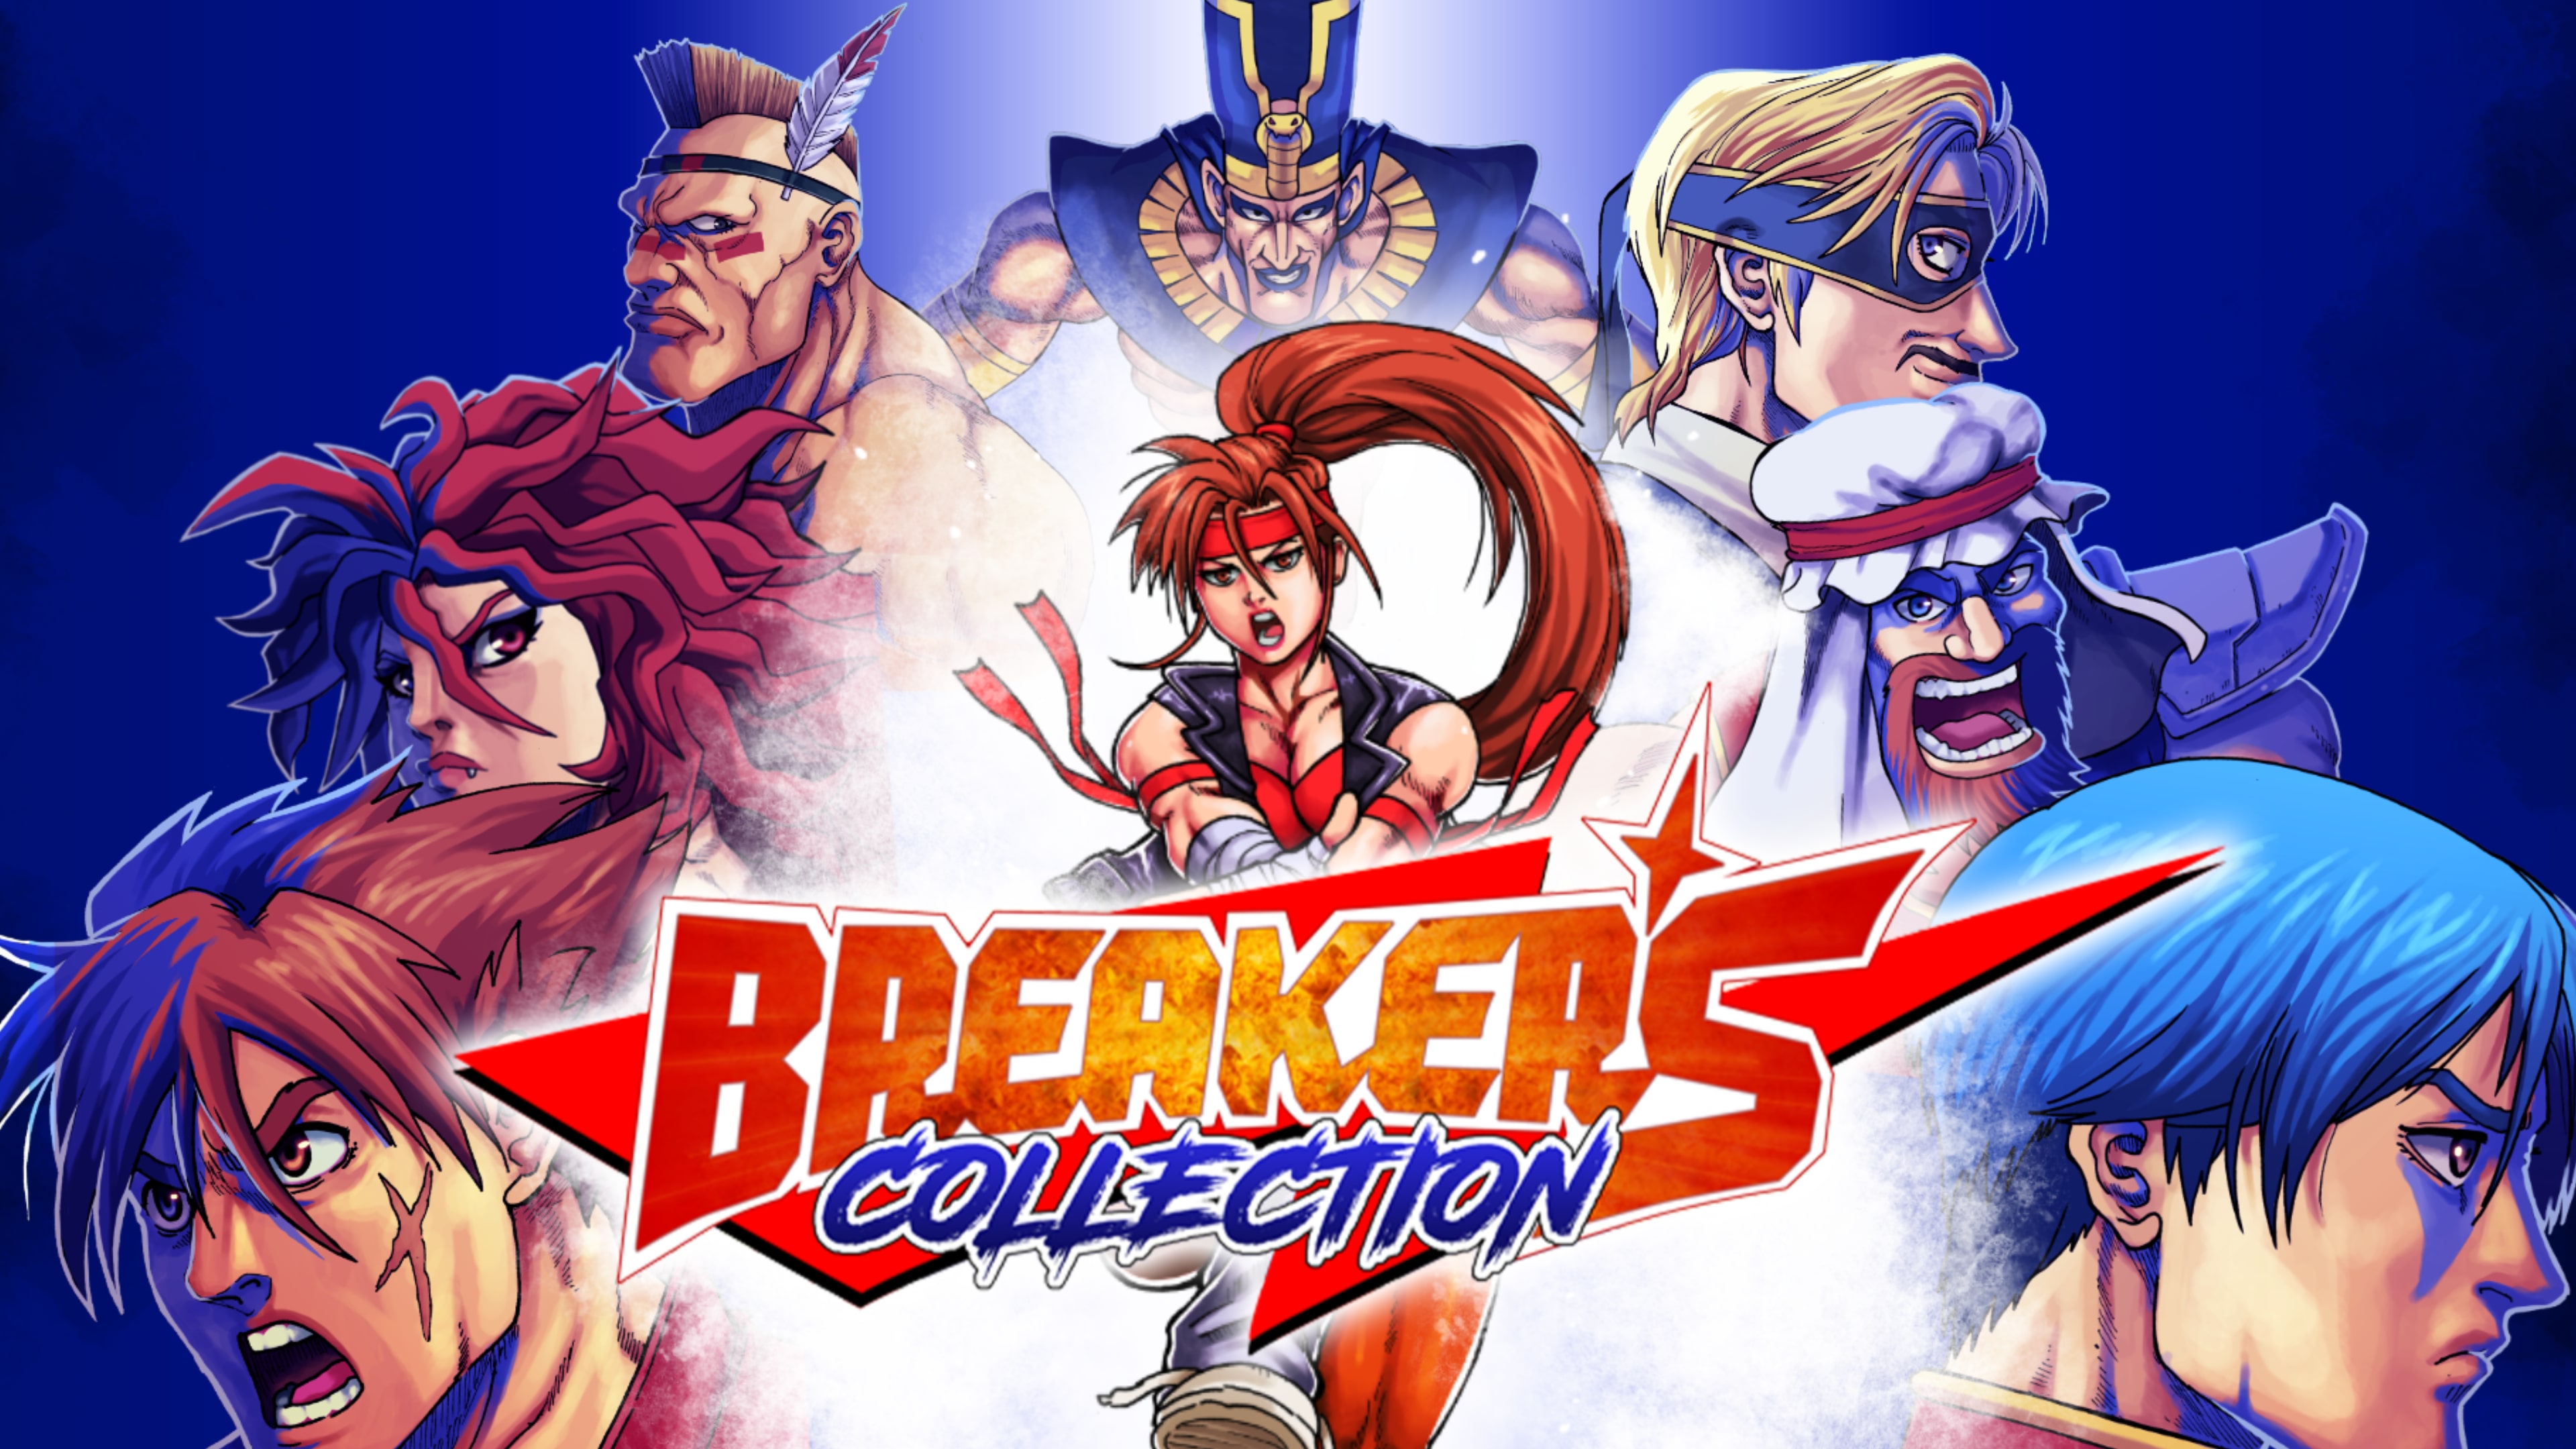 Breakers Collection (英文)